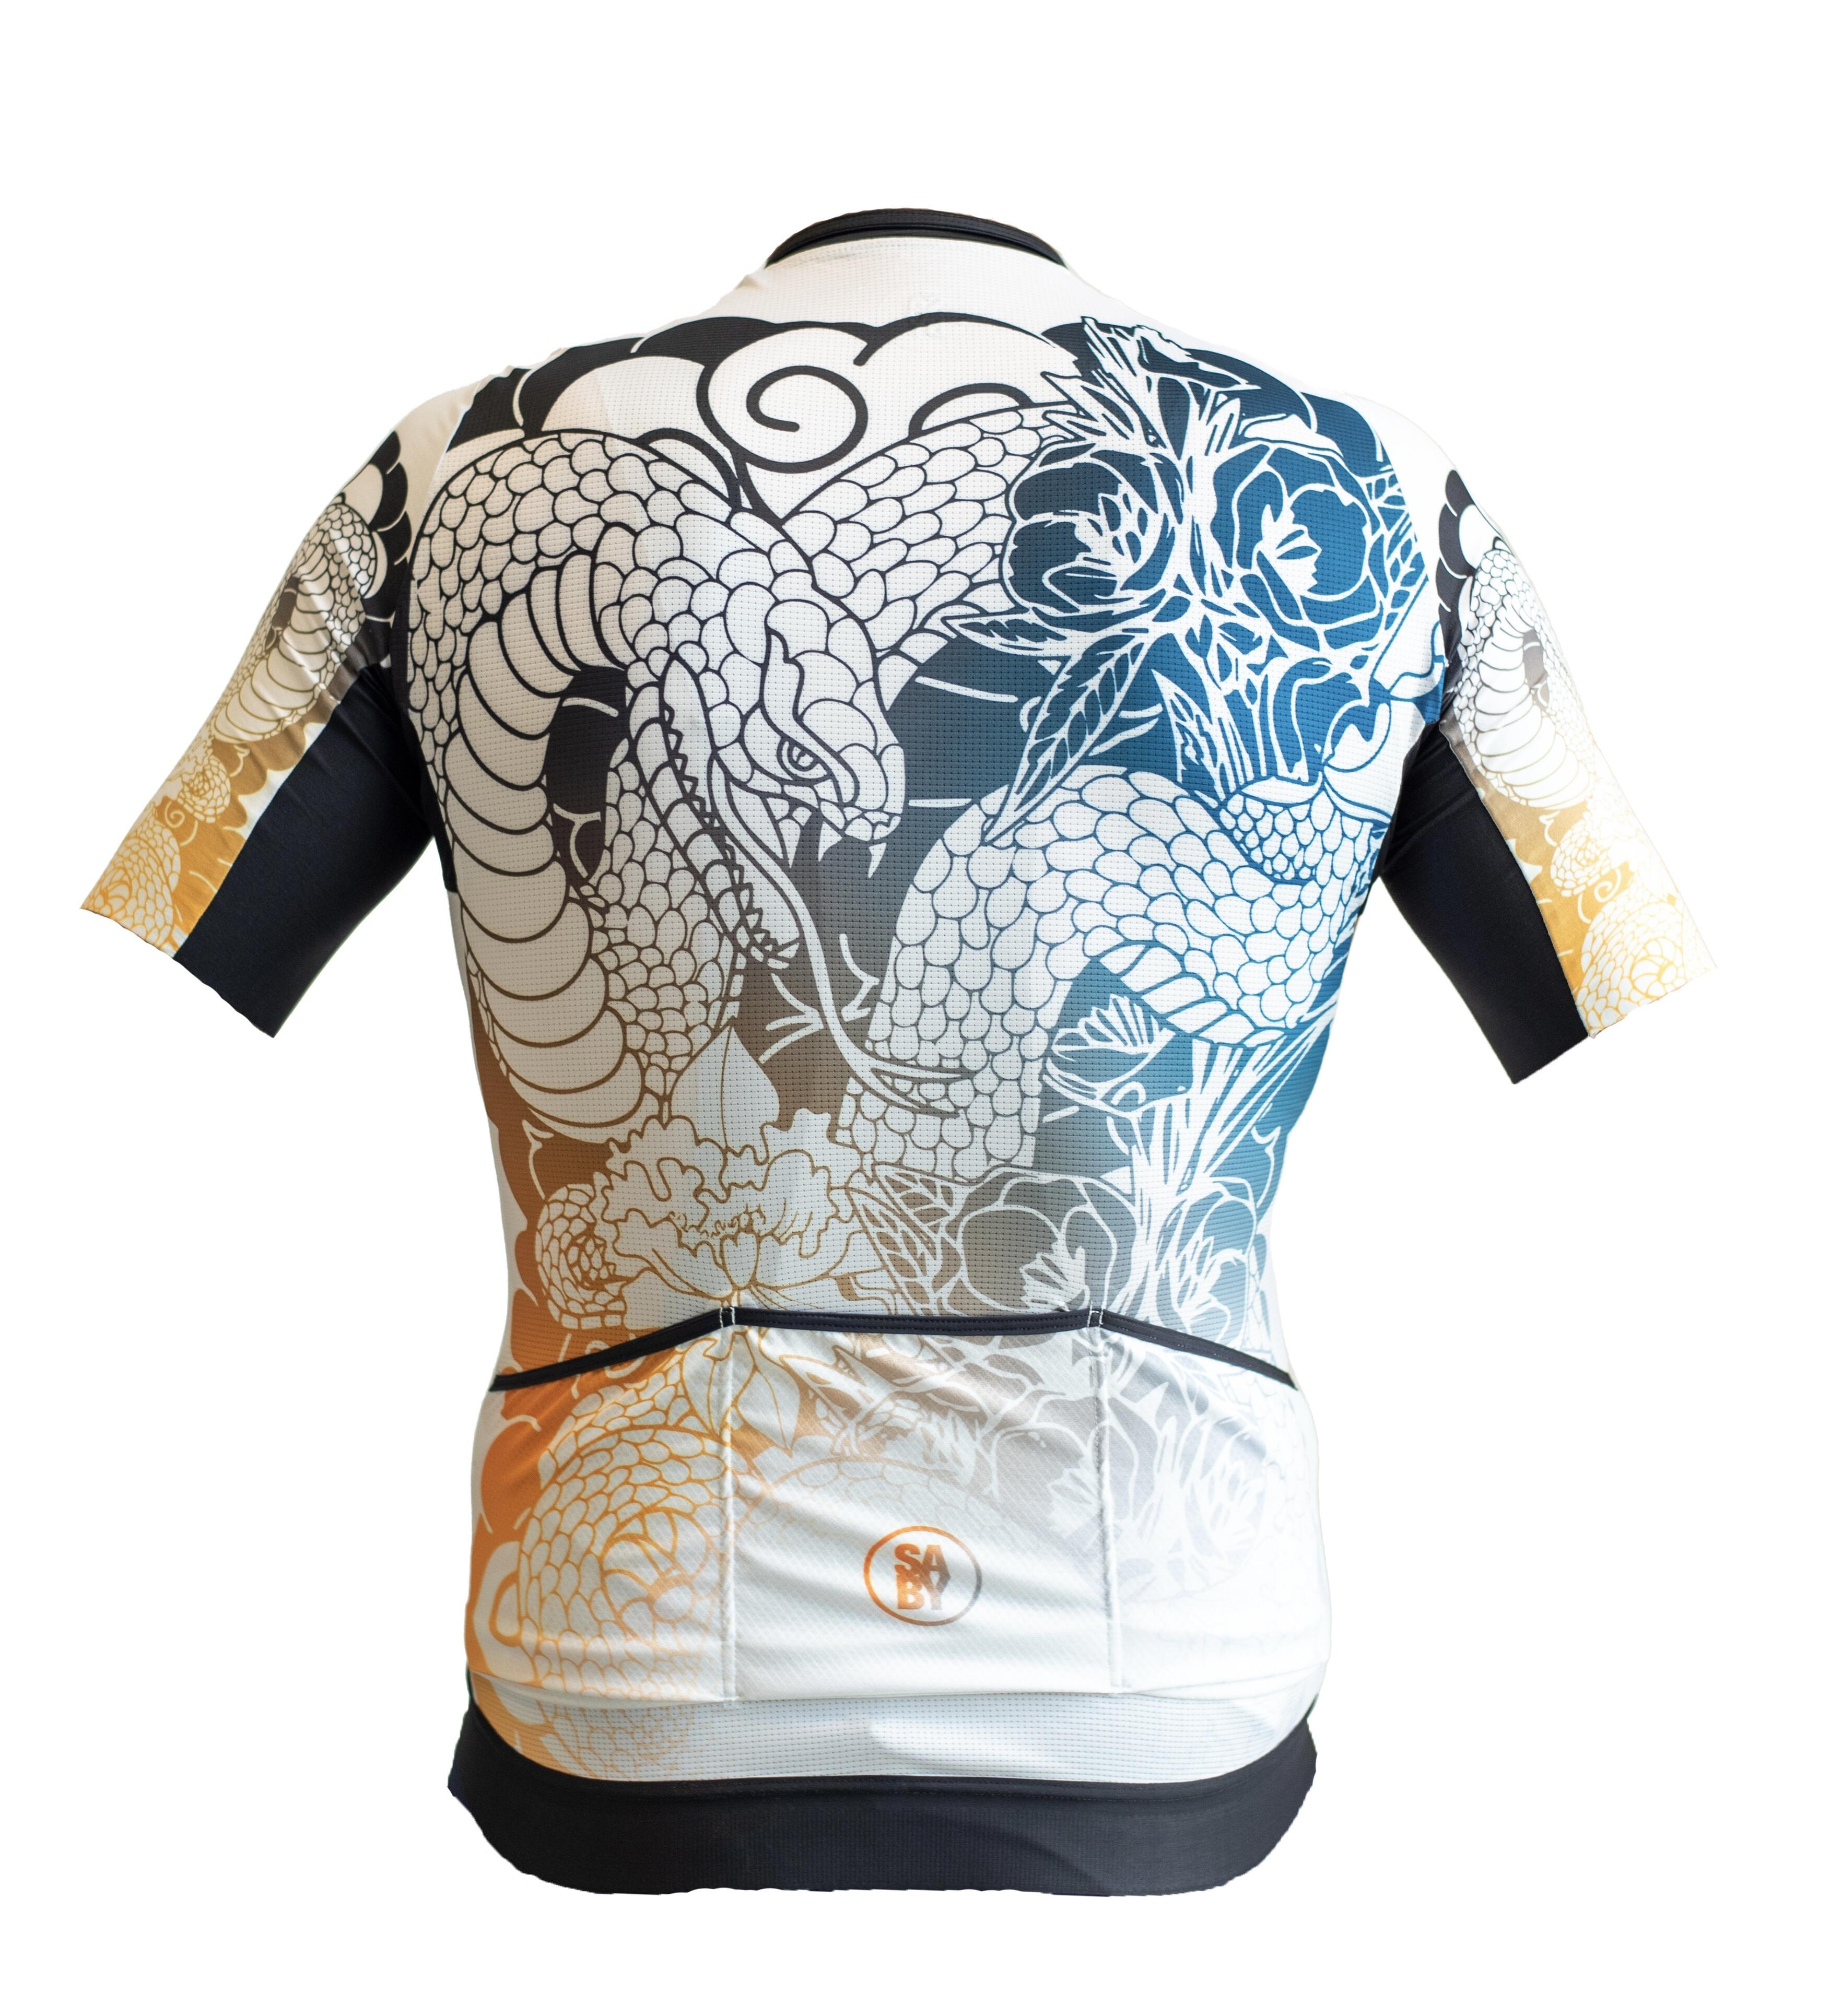 Maglia Limited Edition Japan